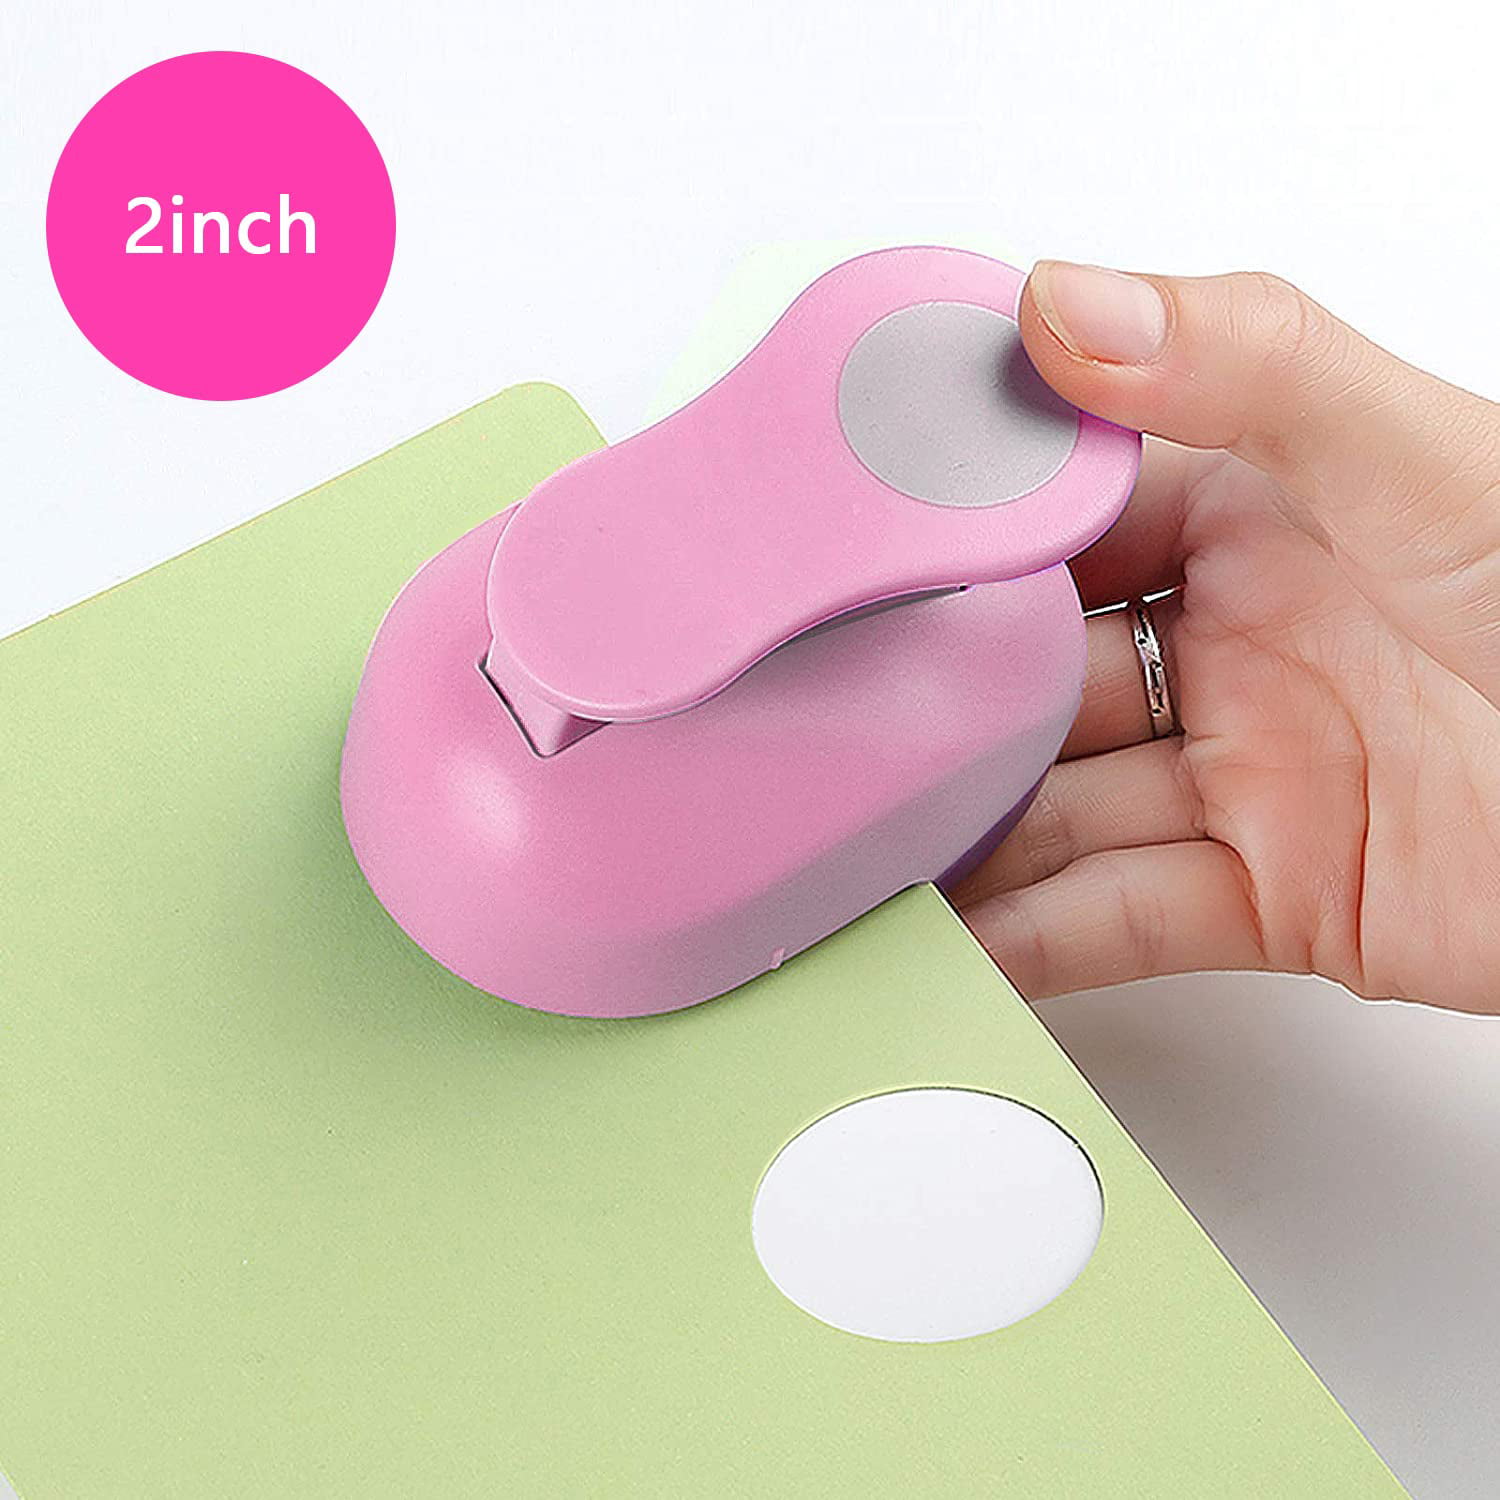 2 Inch Circle Punch, Hole Punch Shapes, Paper Punch Set for Scrapbooking  Festival Greeting Card Albums Photos craft punchers